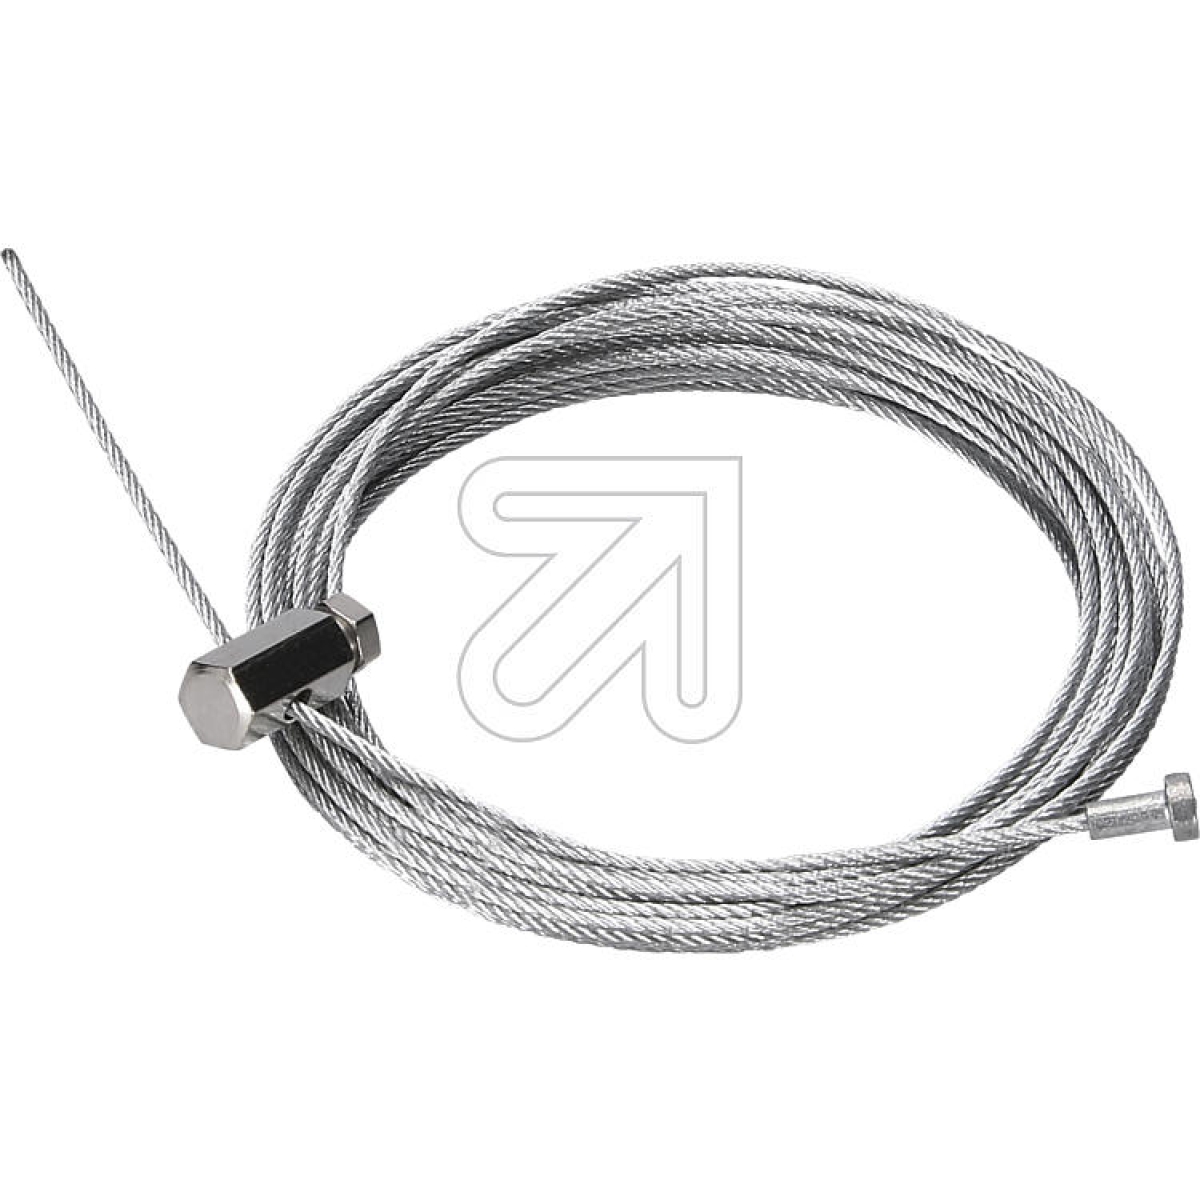 Global TracSuspension cable open SKB 34-1/5M , 5000mmArticle-No: 669730